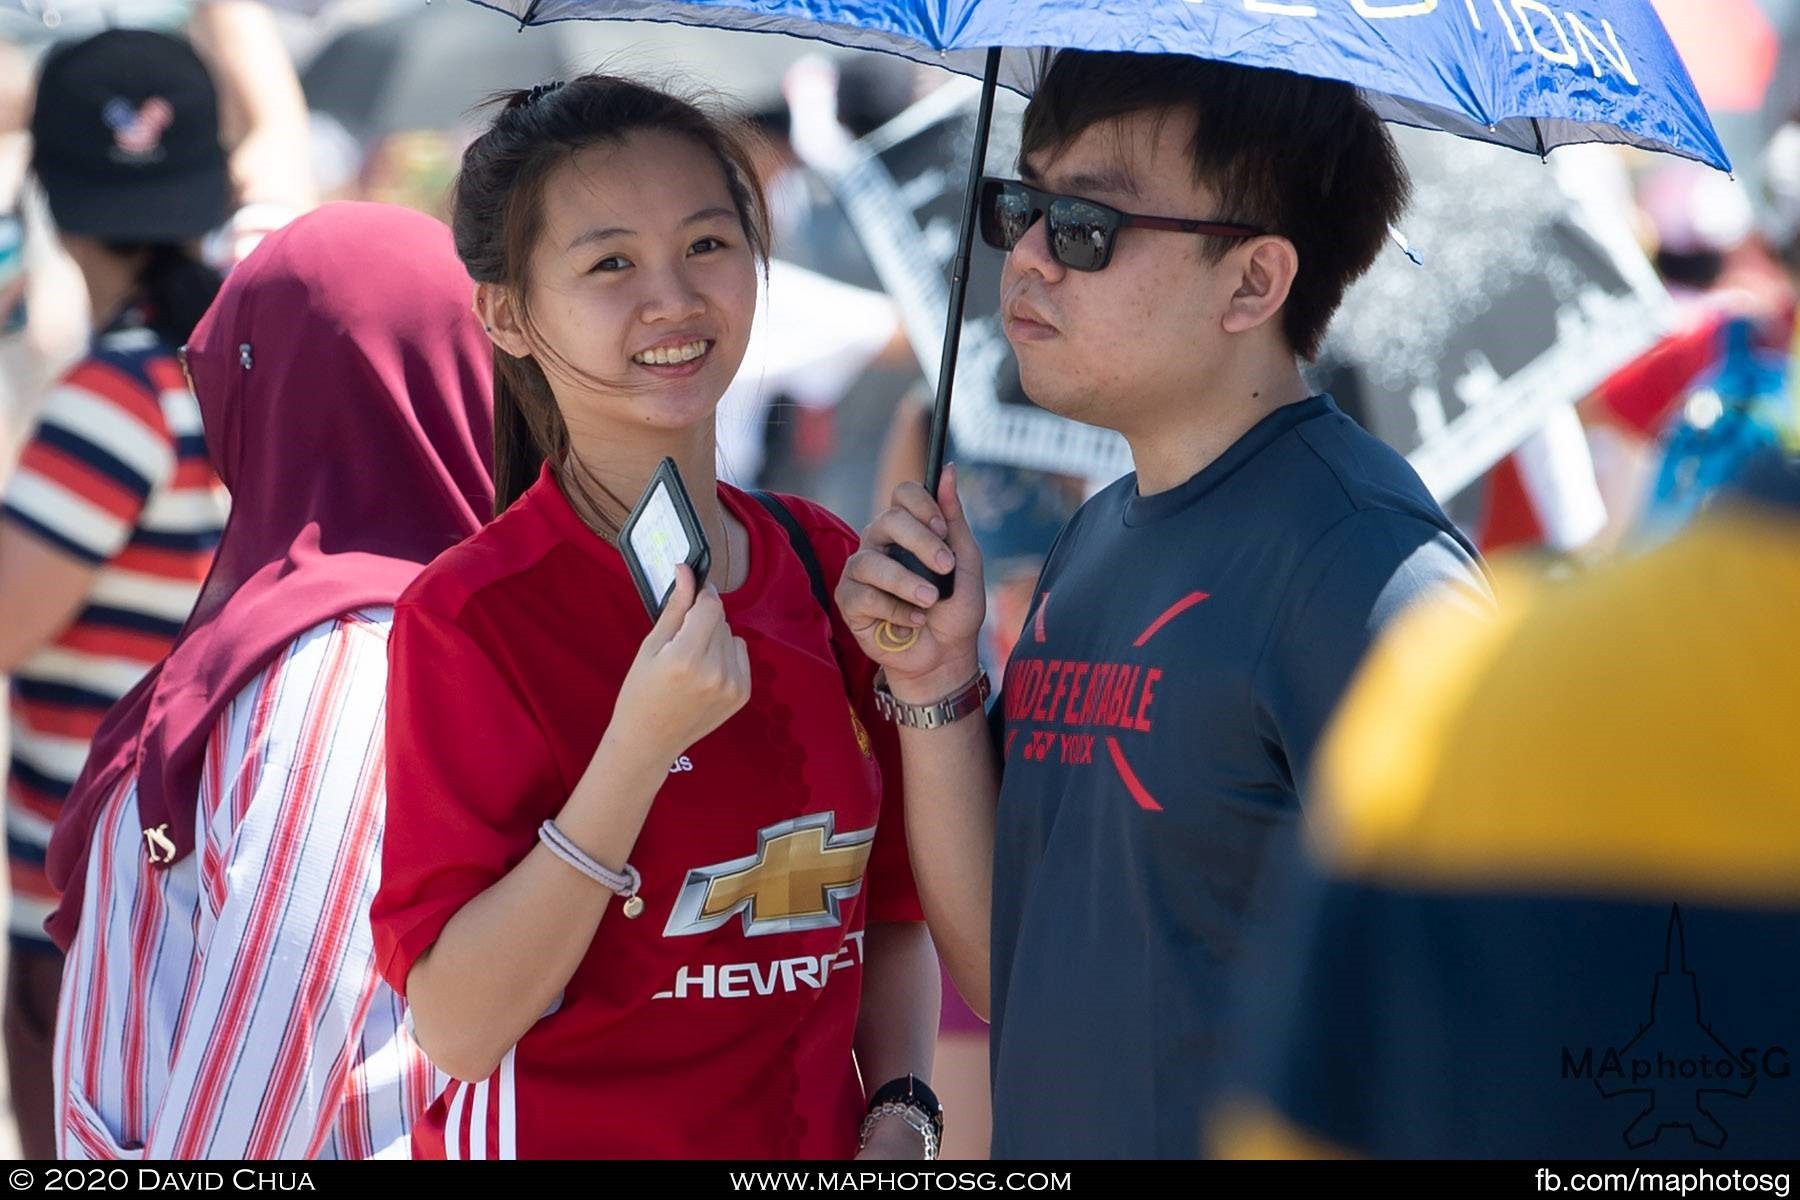 Beautiful smile while waiting for the aerial display to start